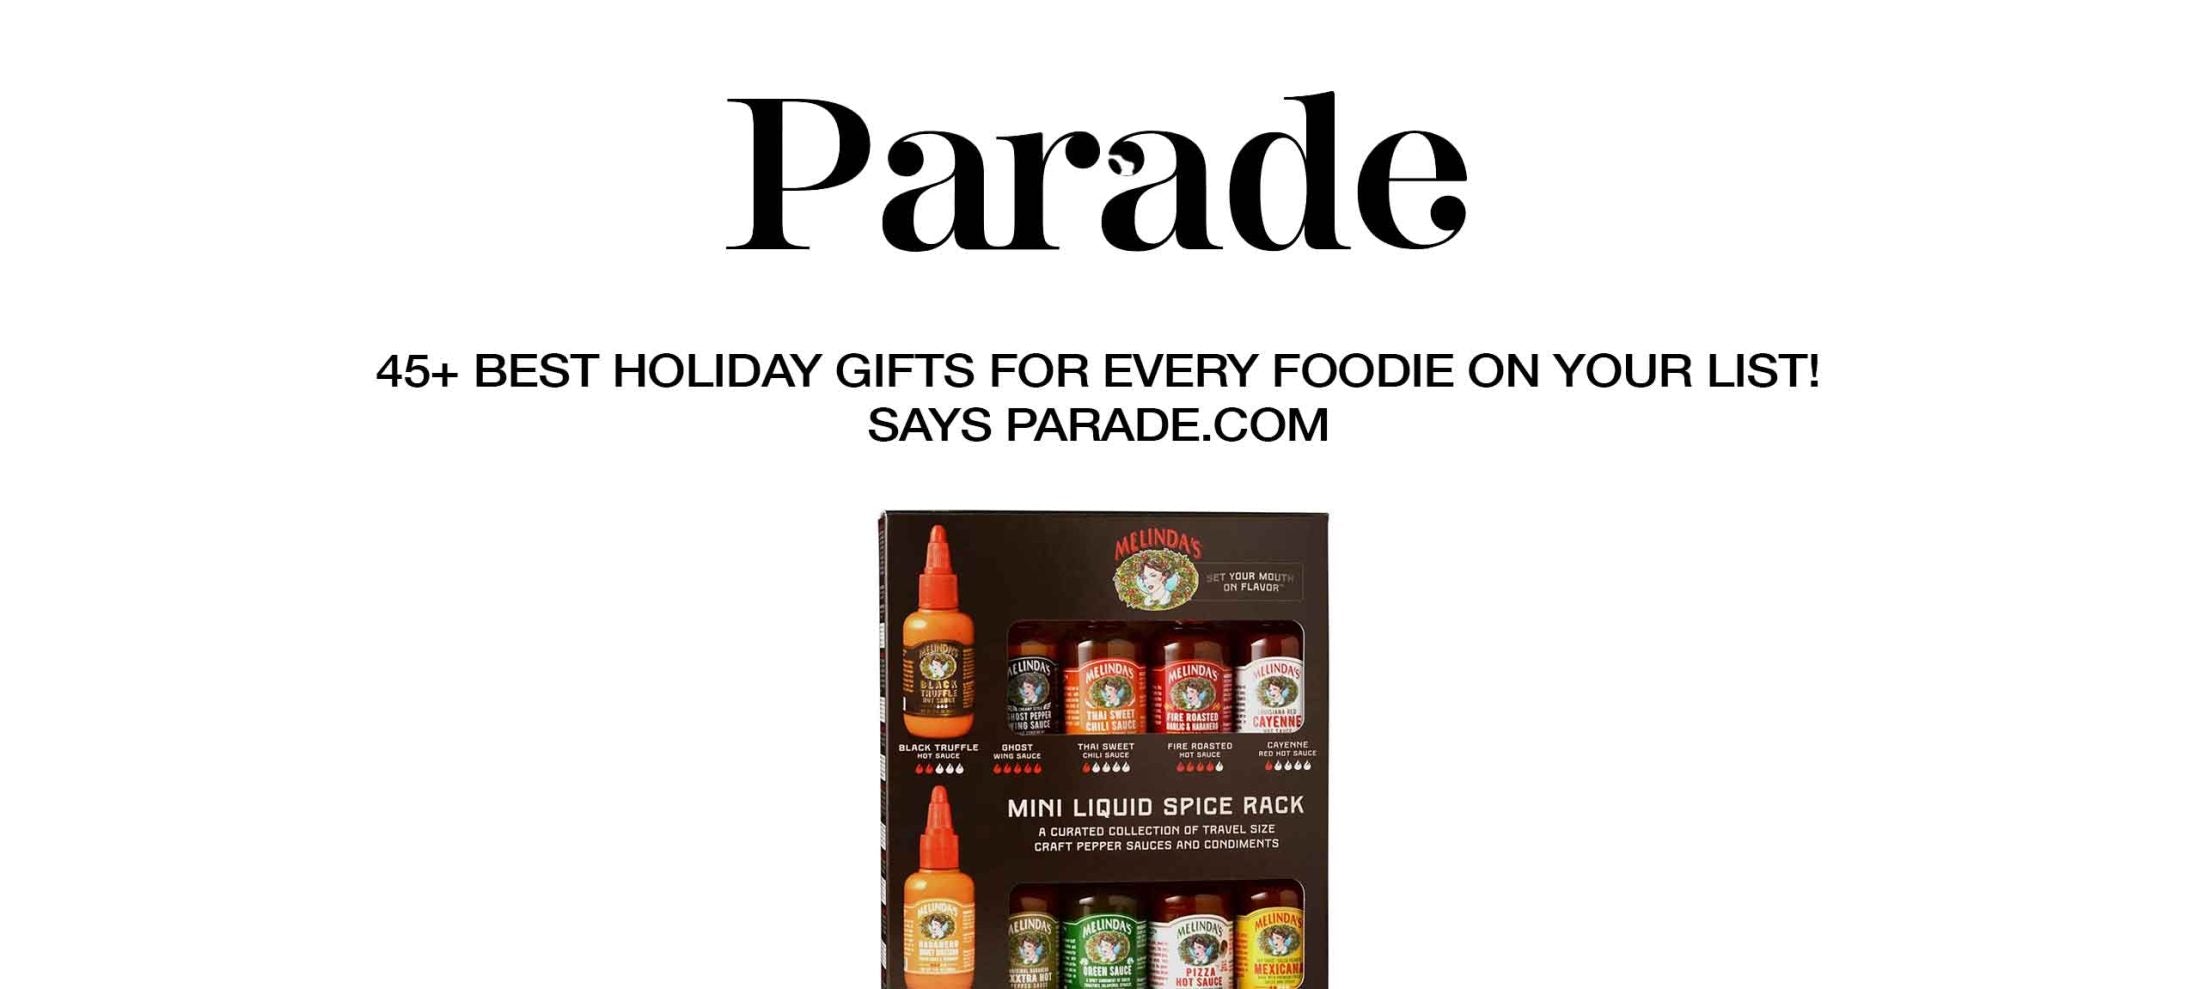 45+ Best Holiday Gifts for Every Foodie On Your List! | Says Parade.com